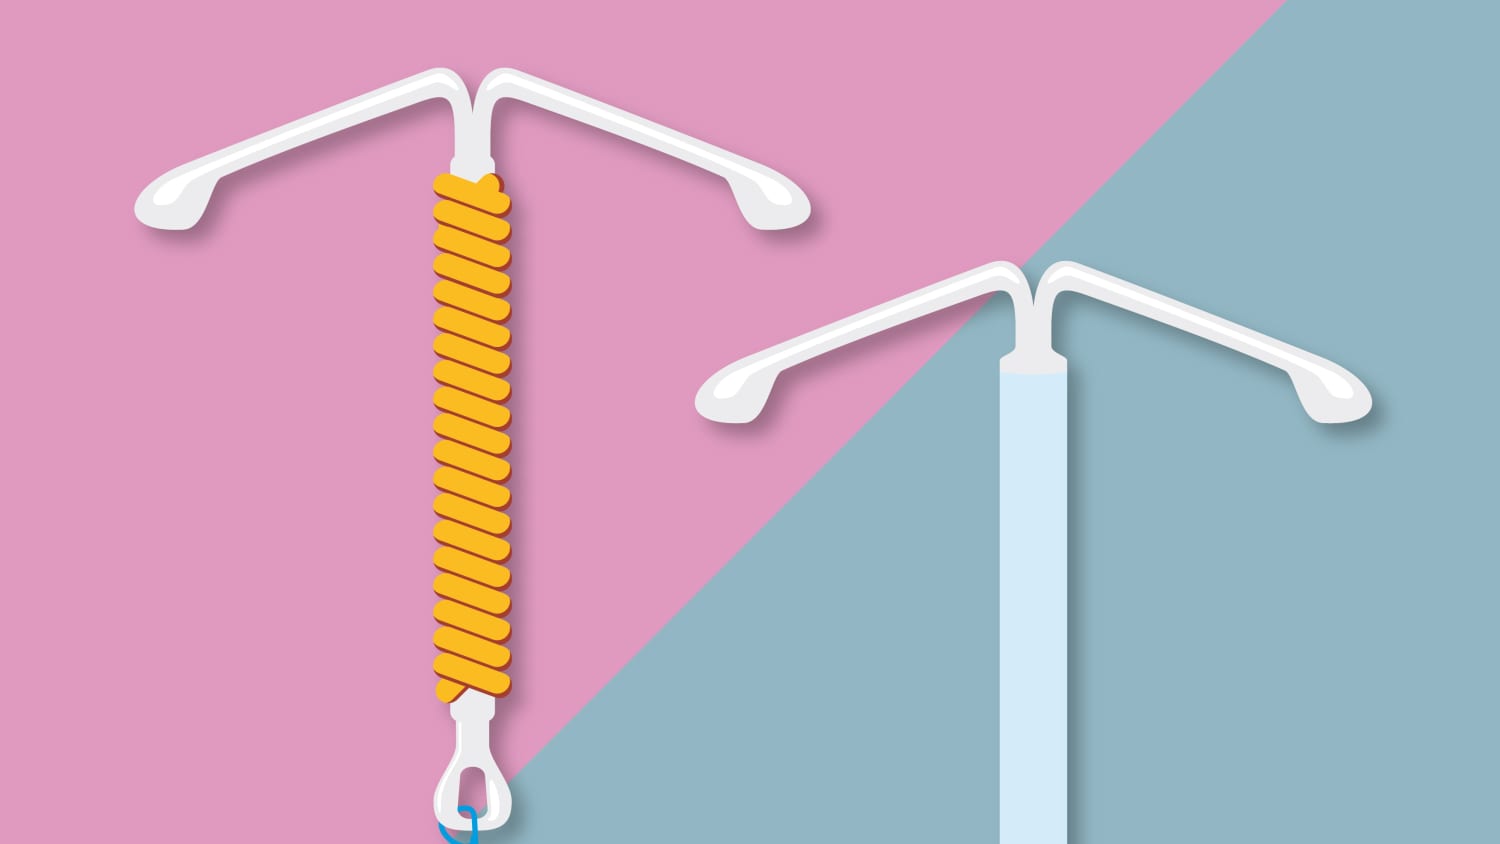 Intrauterine Devices (IUDs): What Women Need to Know > News > Yale Medicine